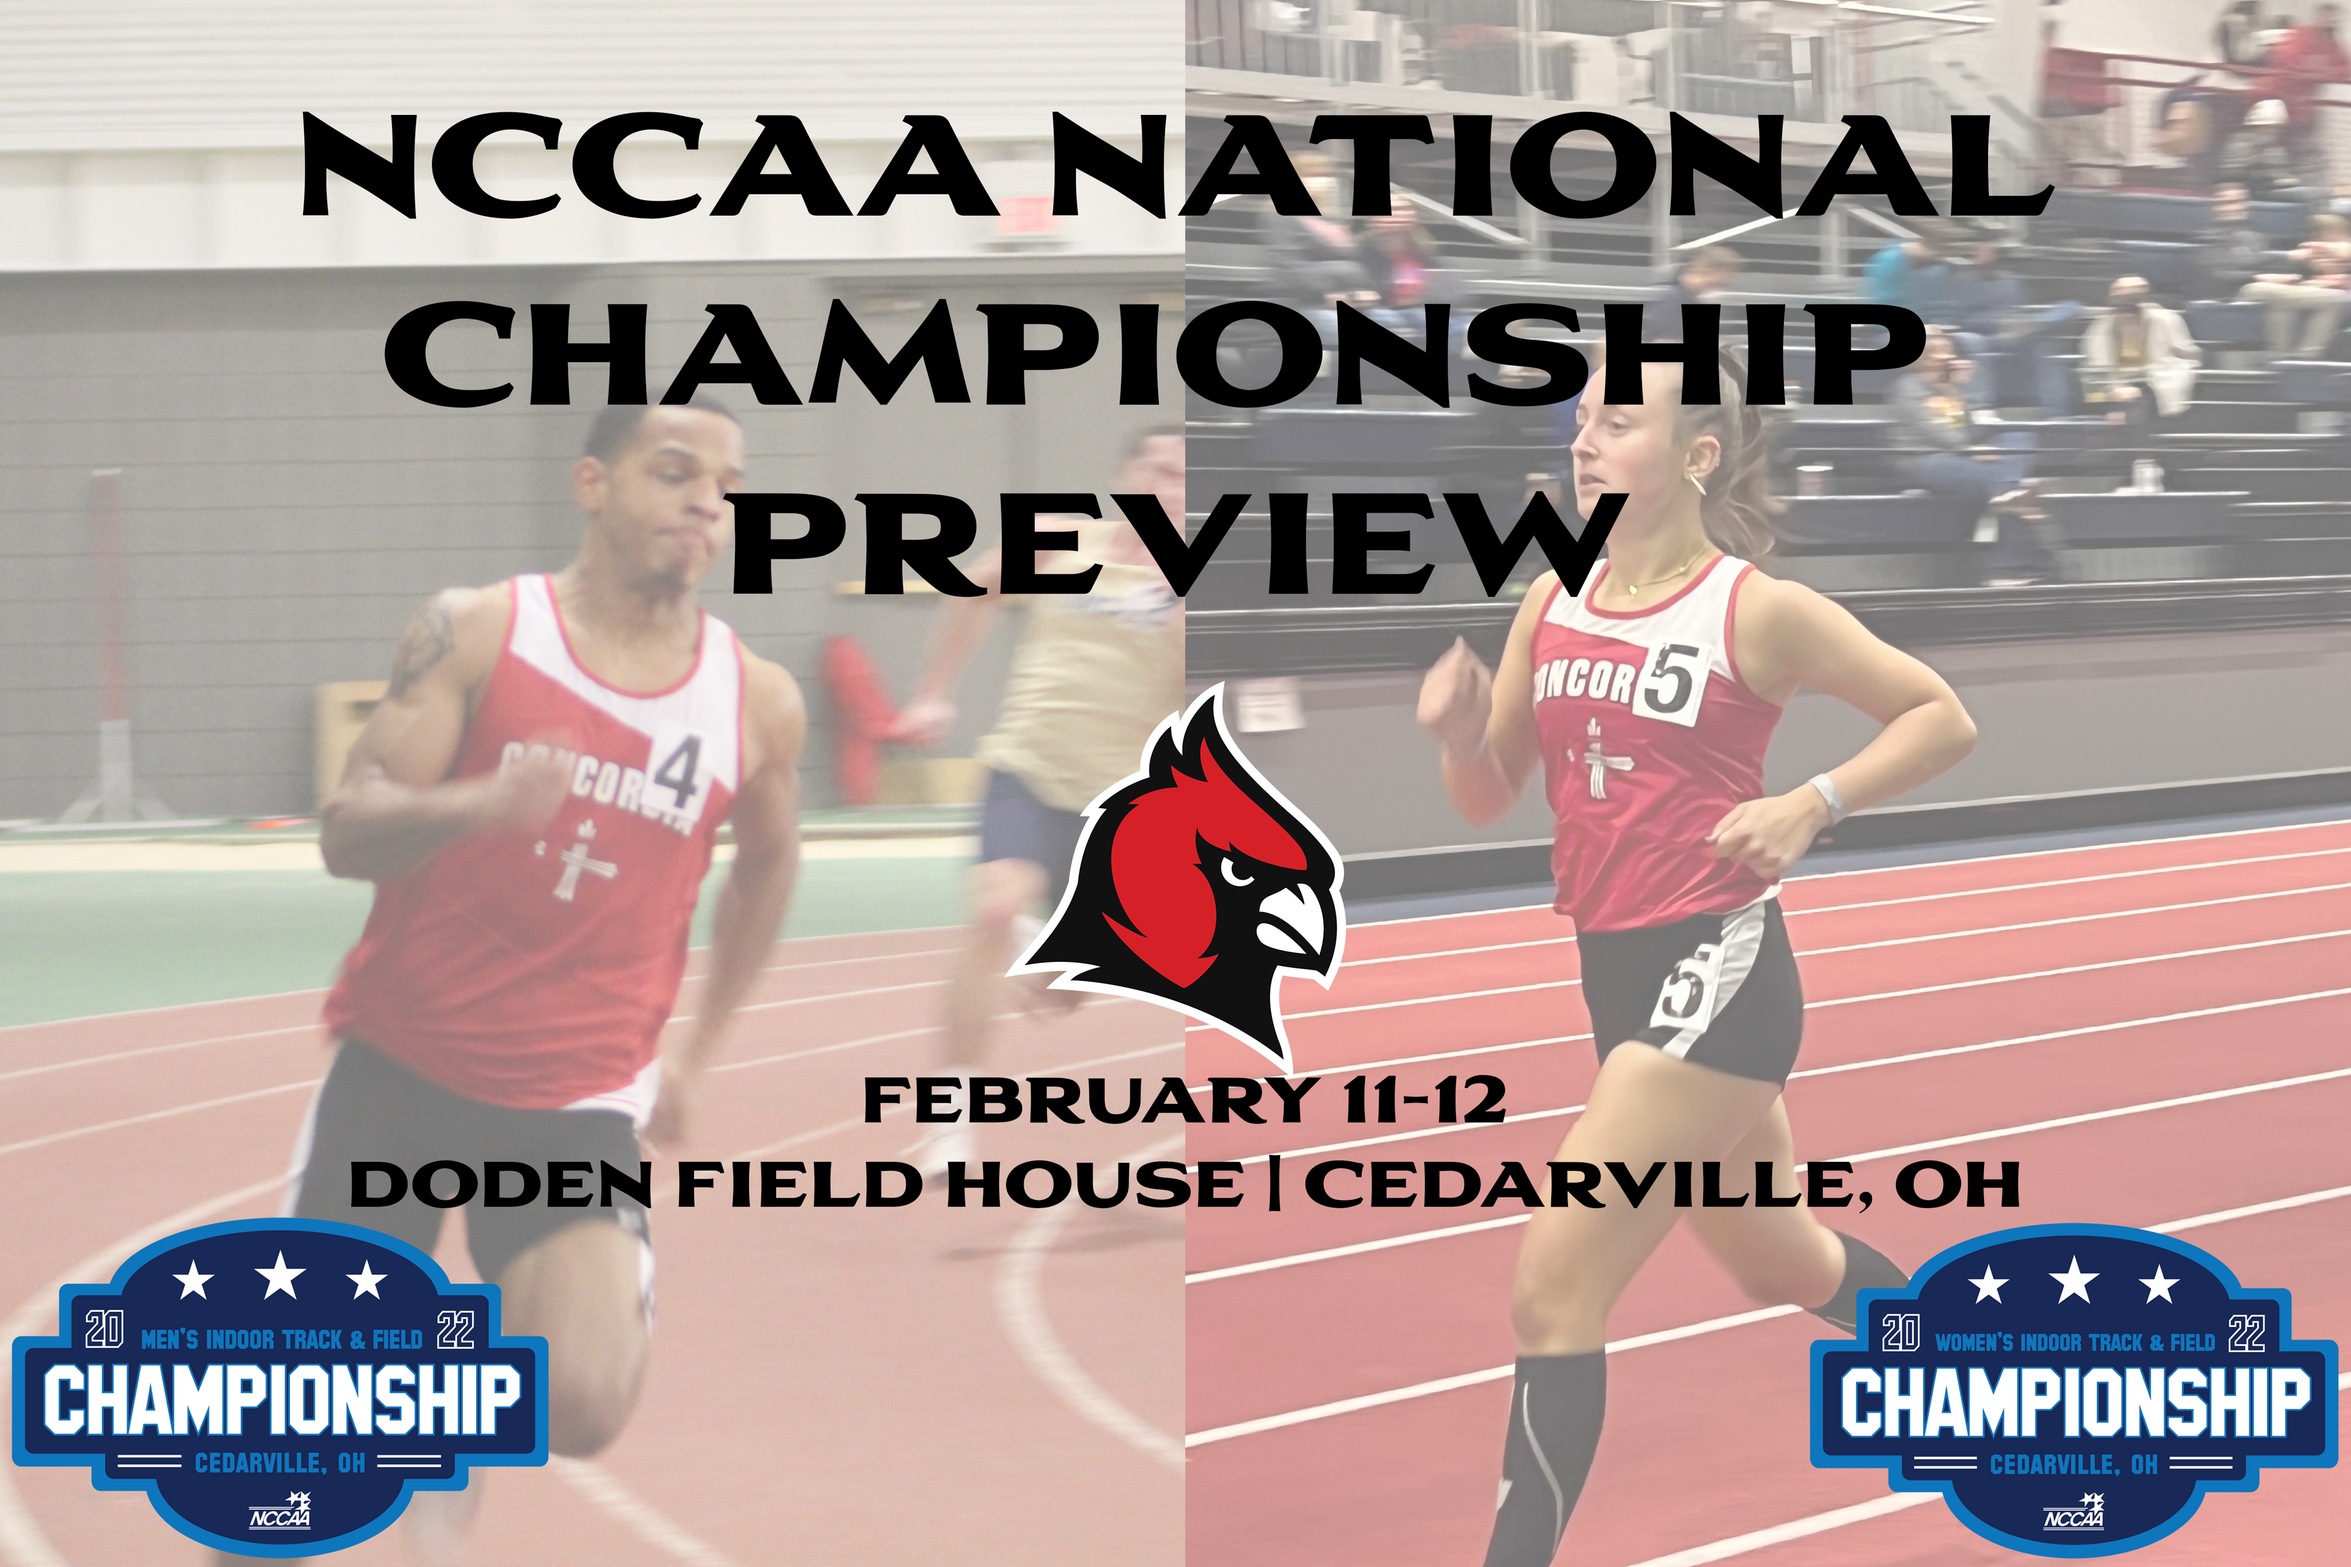 Track and Field set for the NCCAA National Championships this weekend